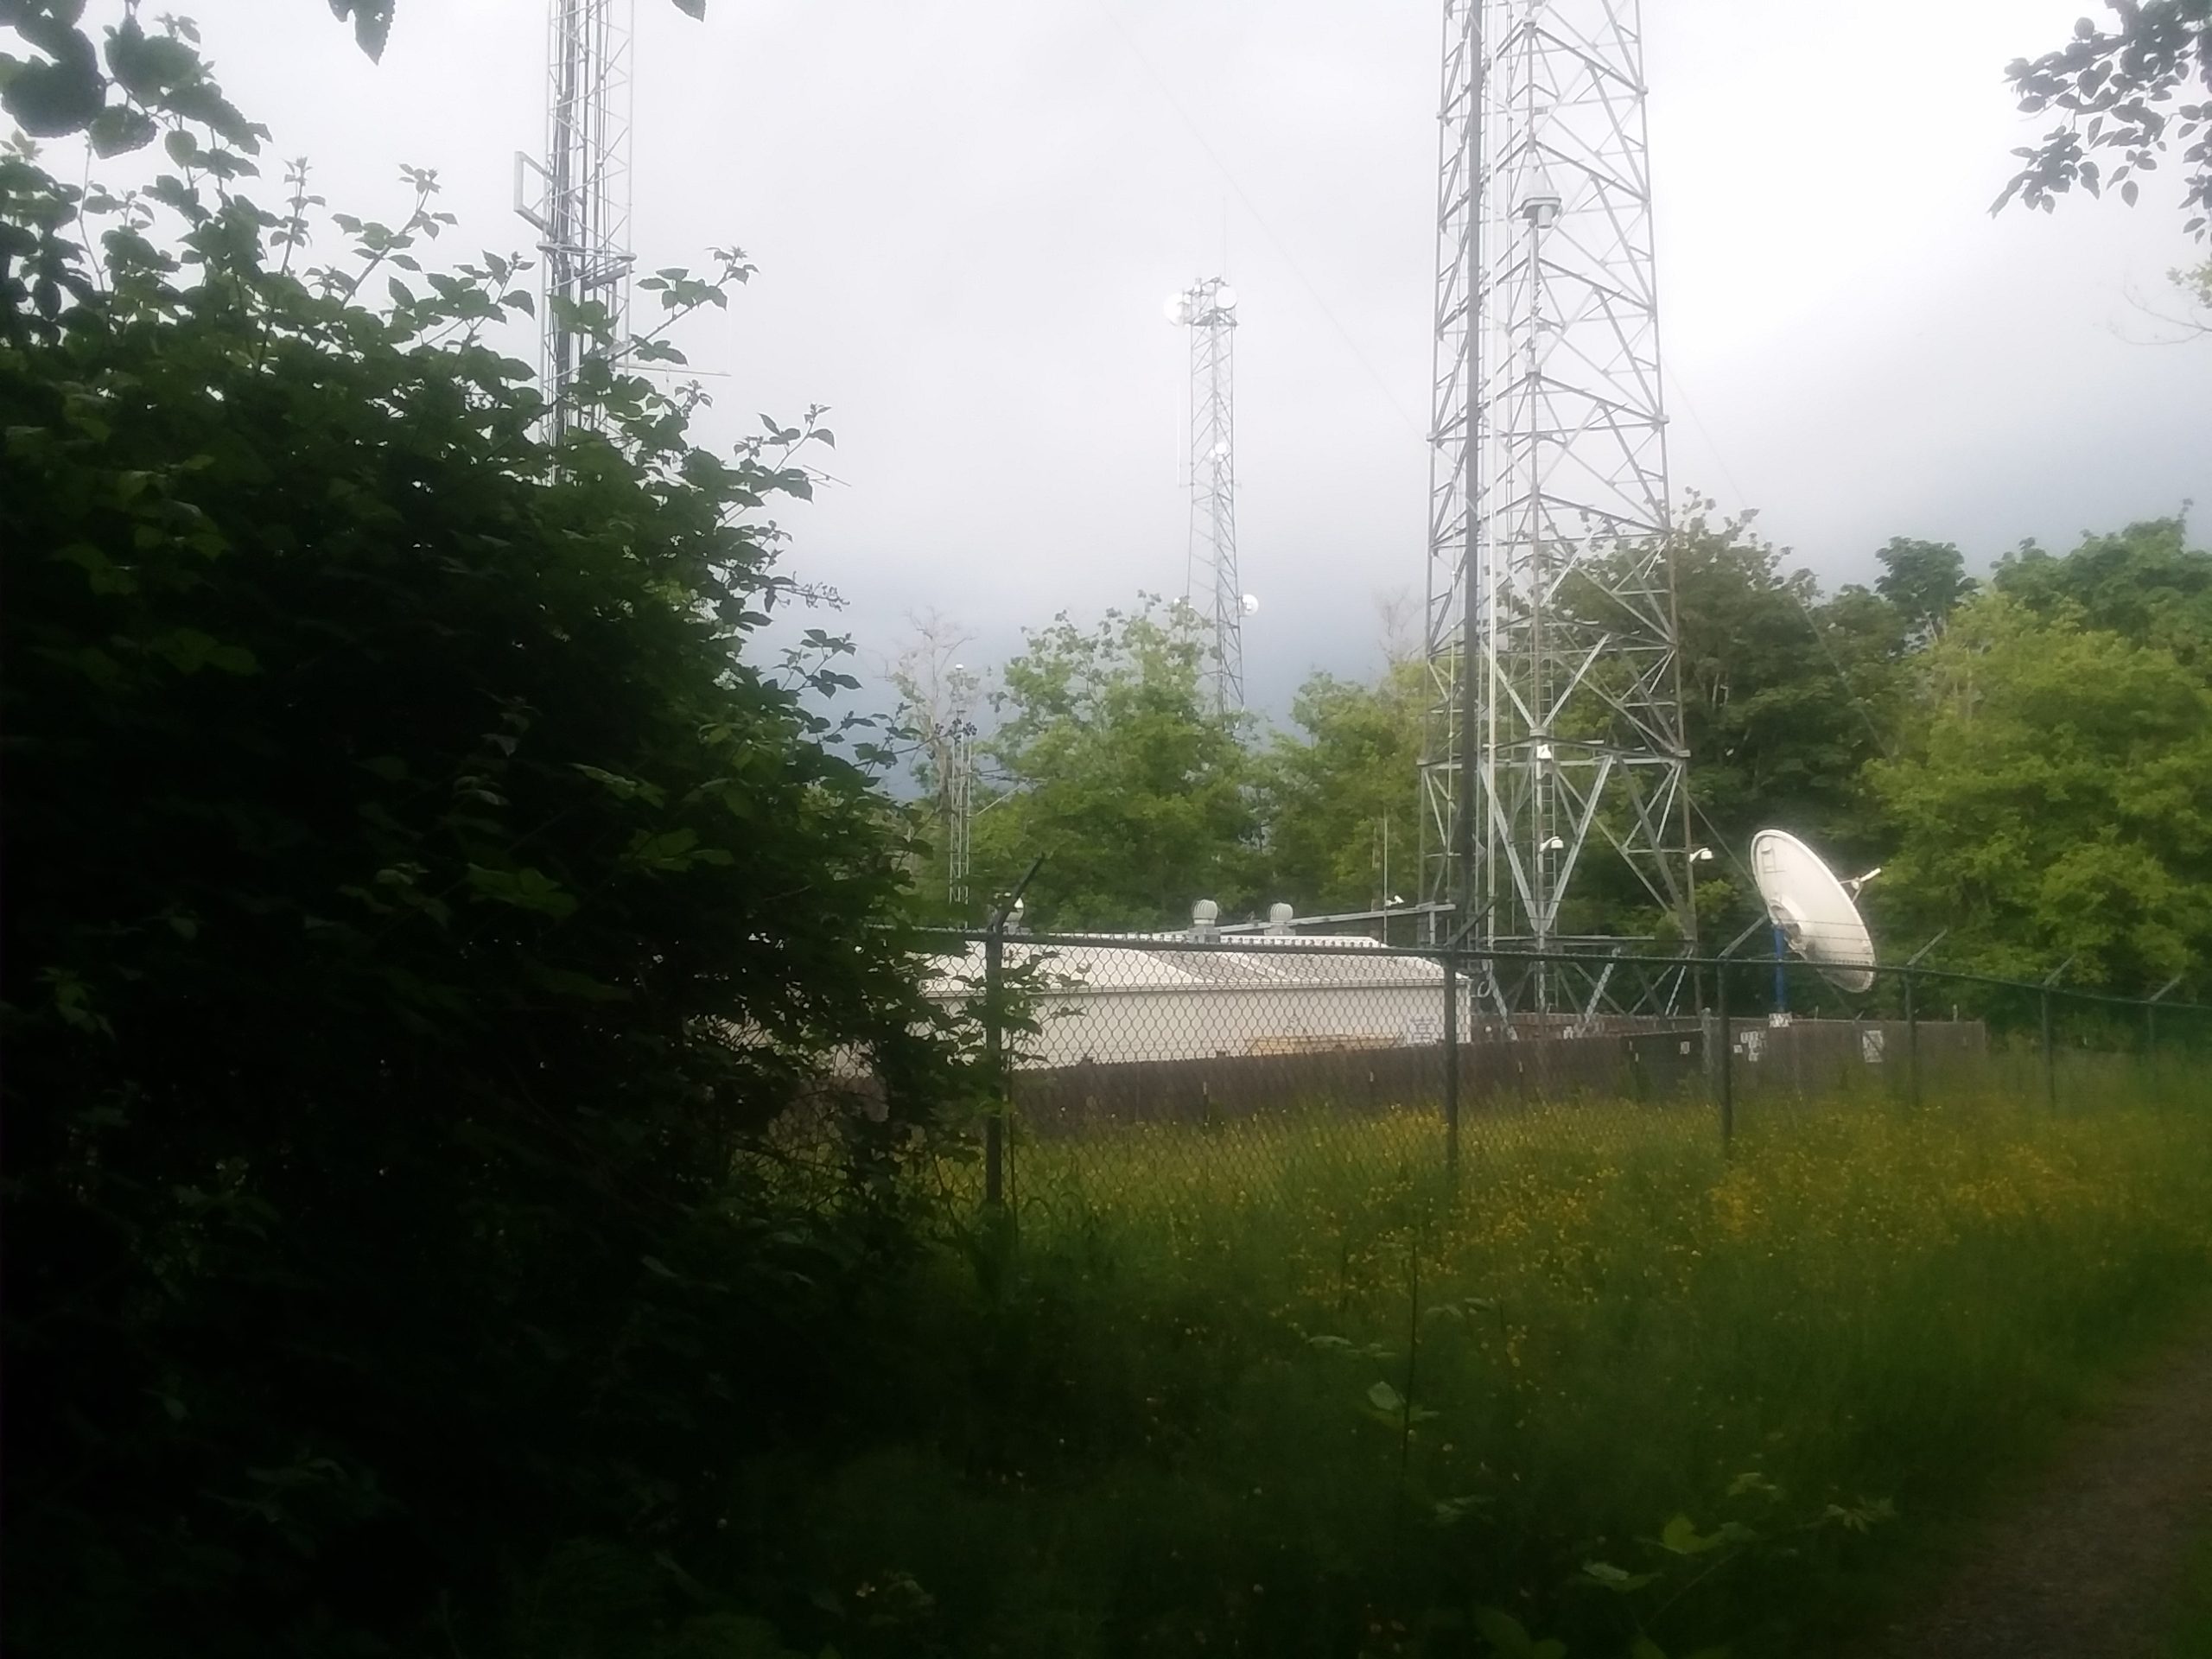 Shows telecommunications equipment and hut in an overgrown meadow.